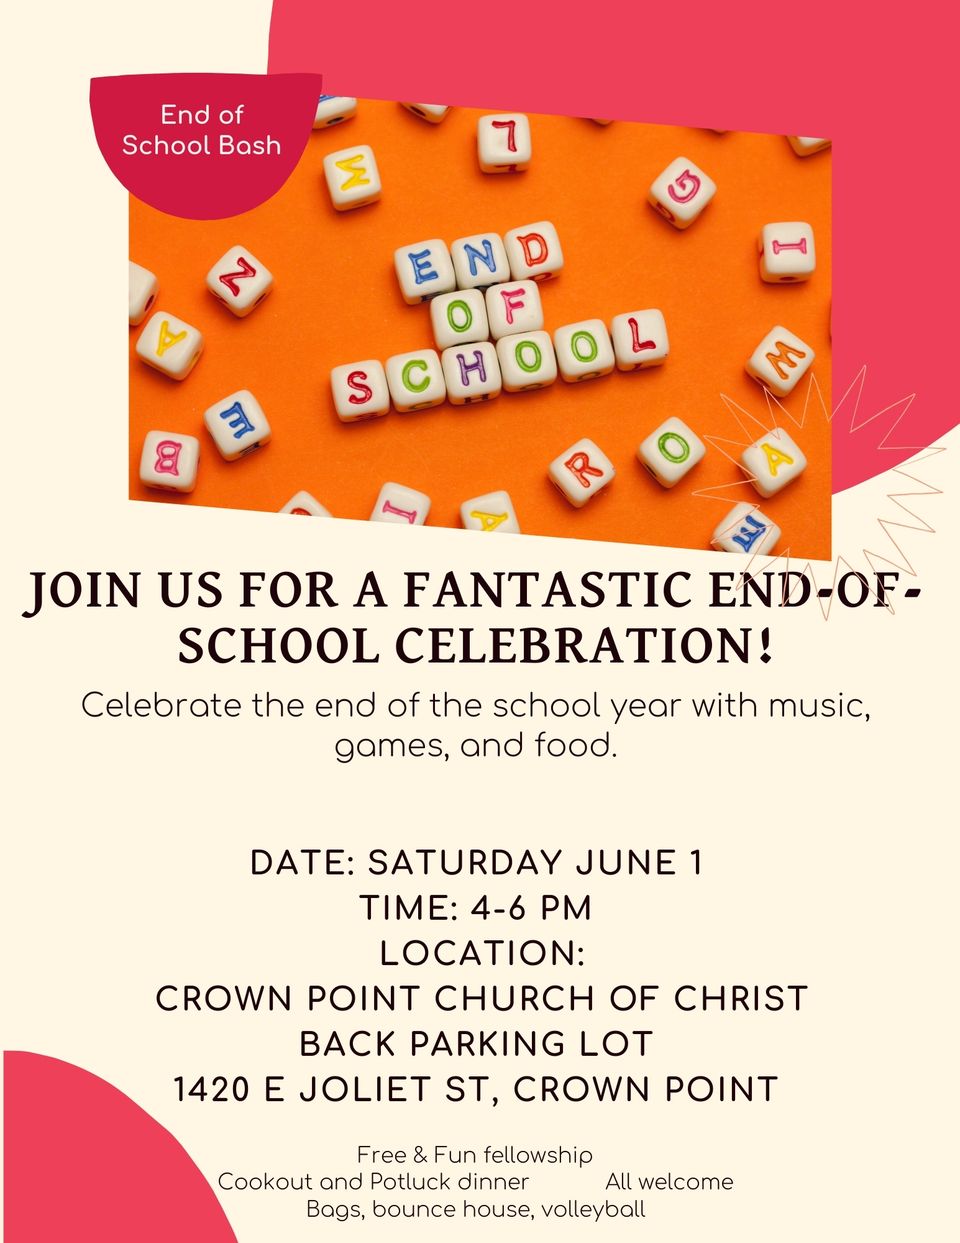 Date saturday june 1 time  time  location crown point church of christ back parking lot